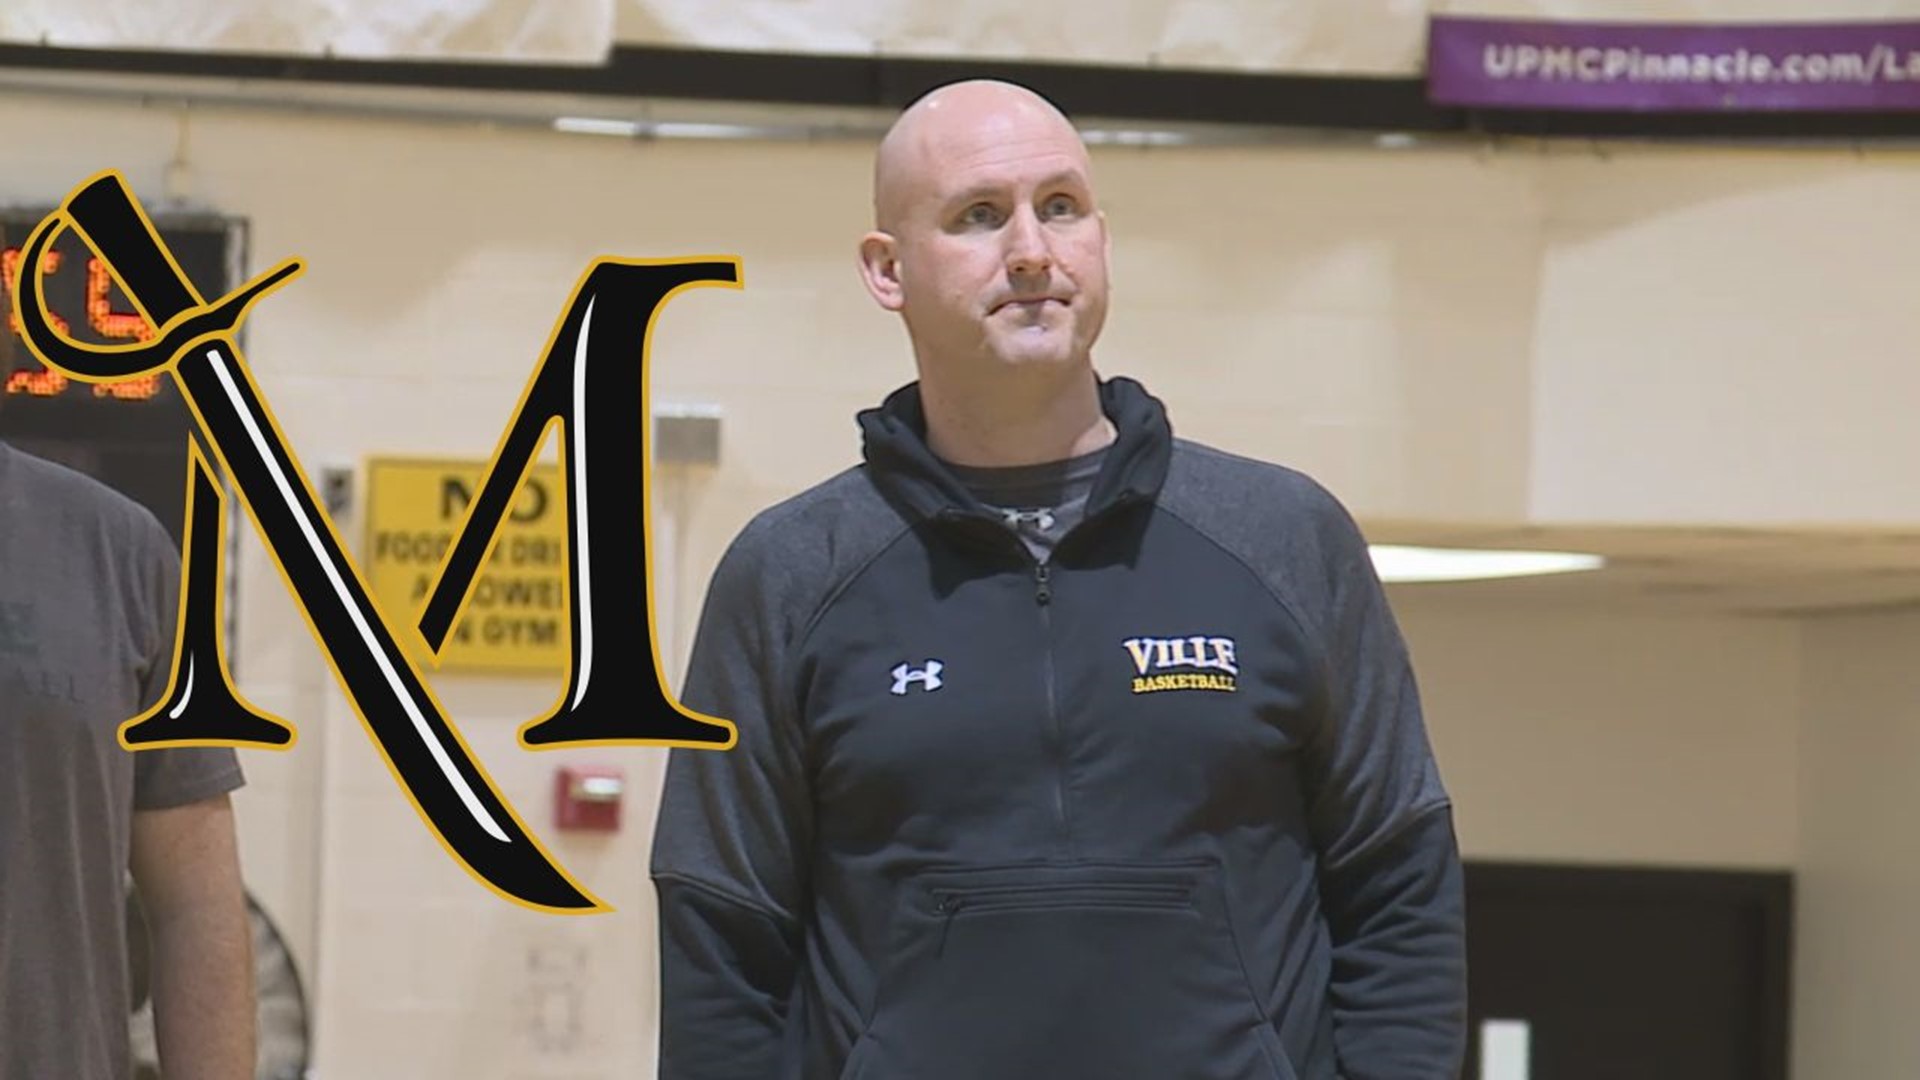 Casey Stitzel has molded the Millersville Men's Basketball team into a winner, as they're off to their best start in almost decades.